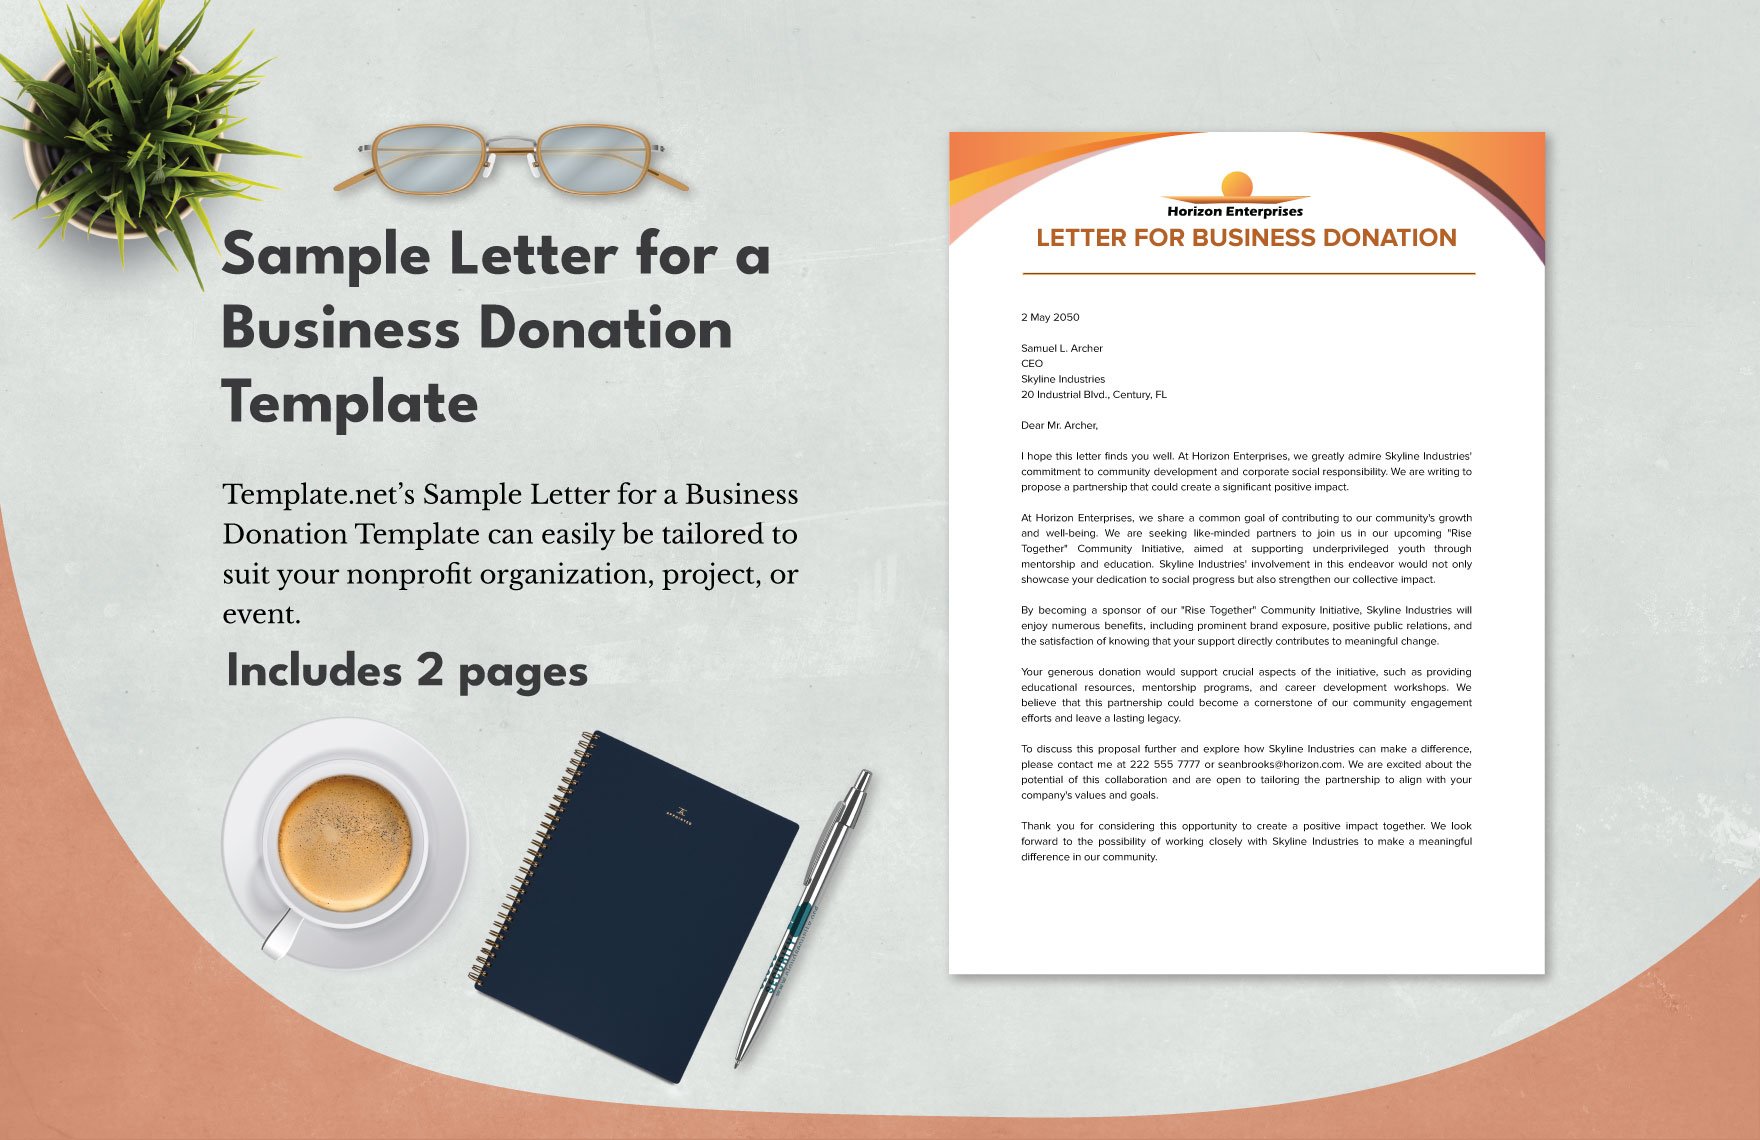 Sample Letter for a Business Donation Template